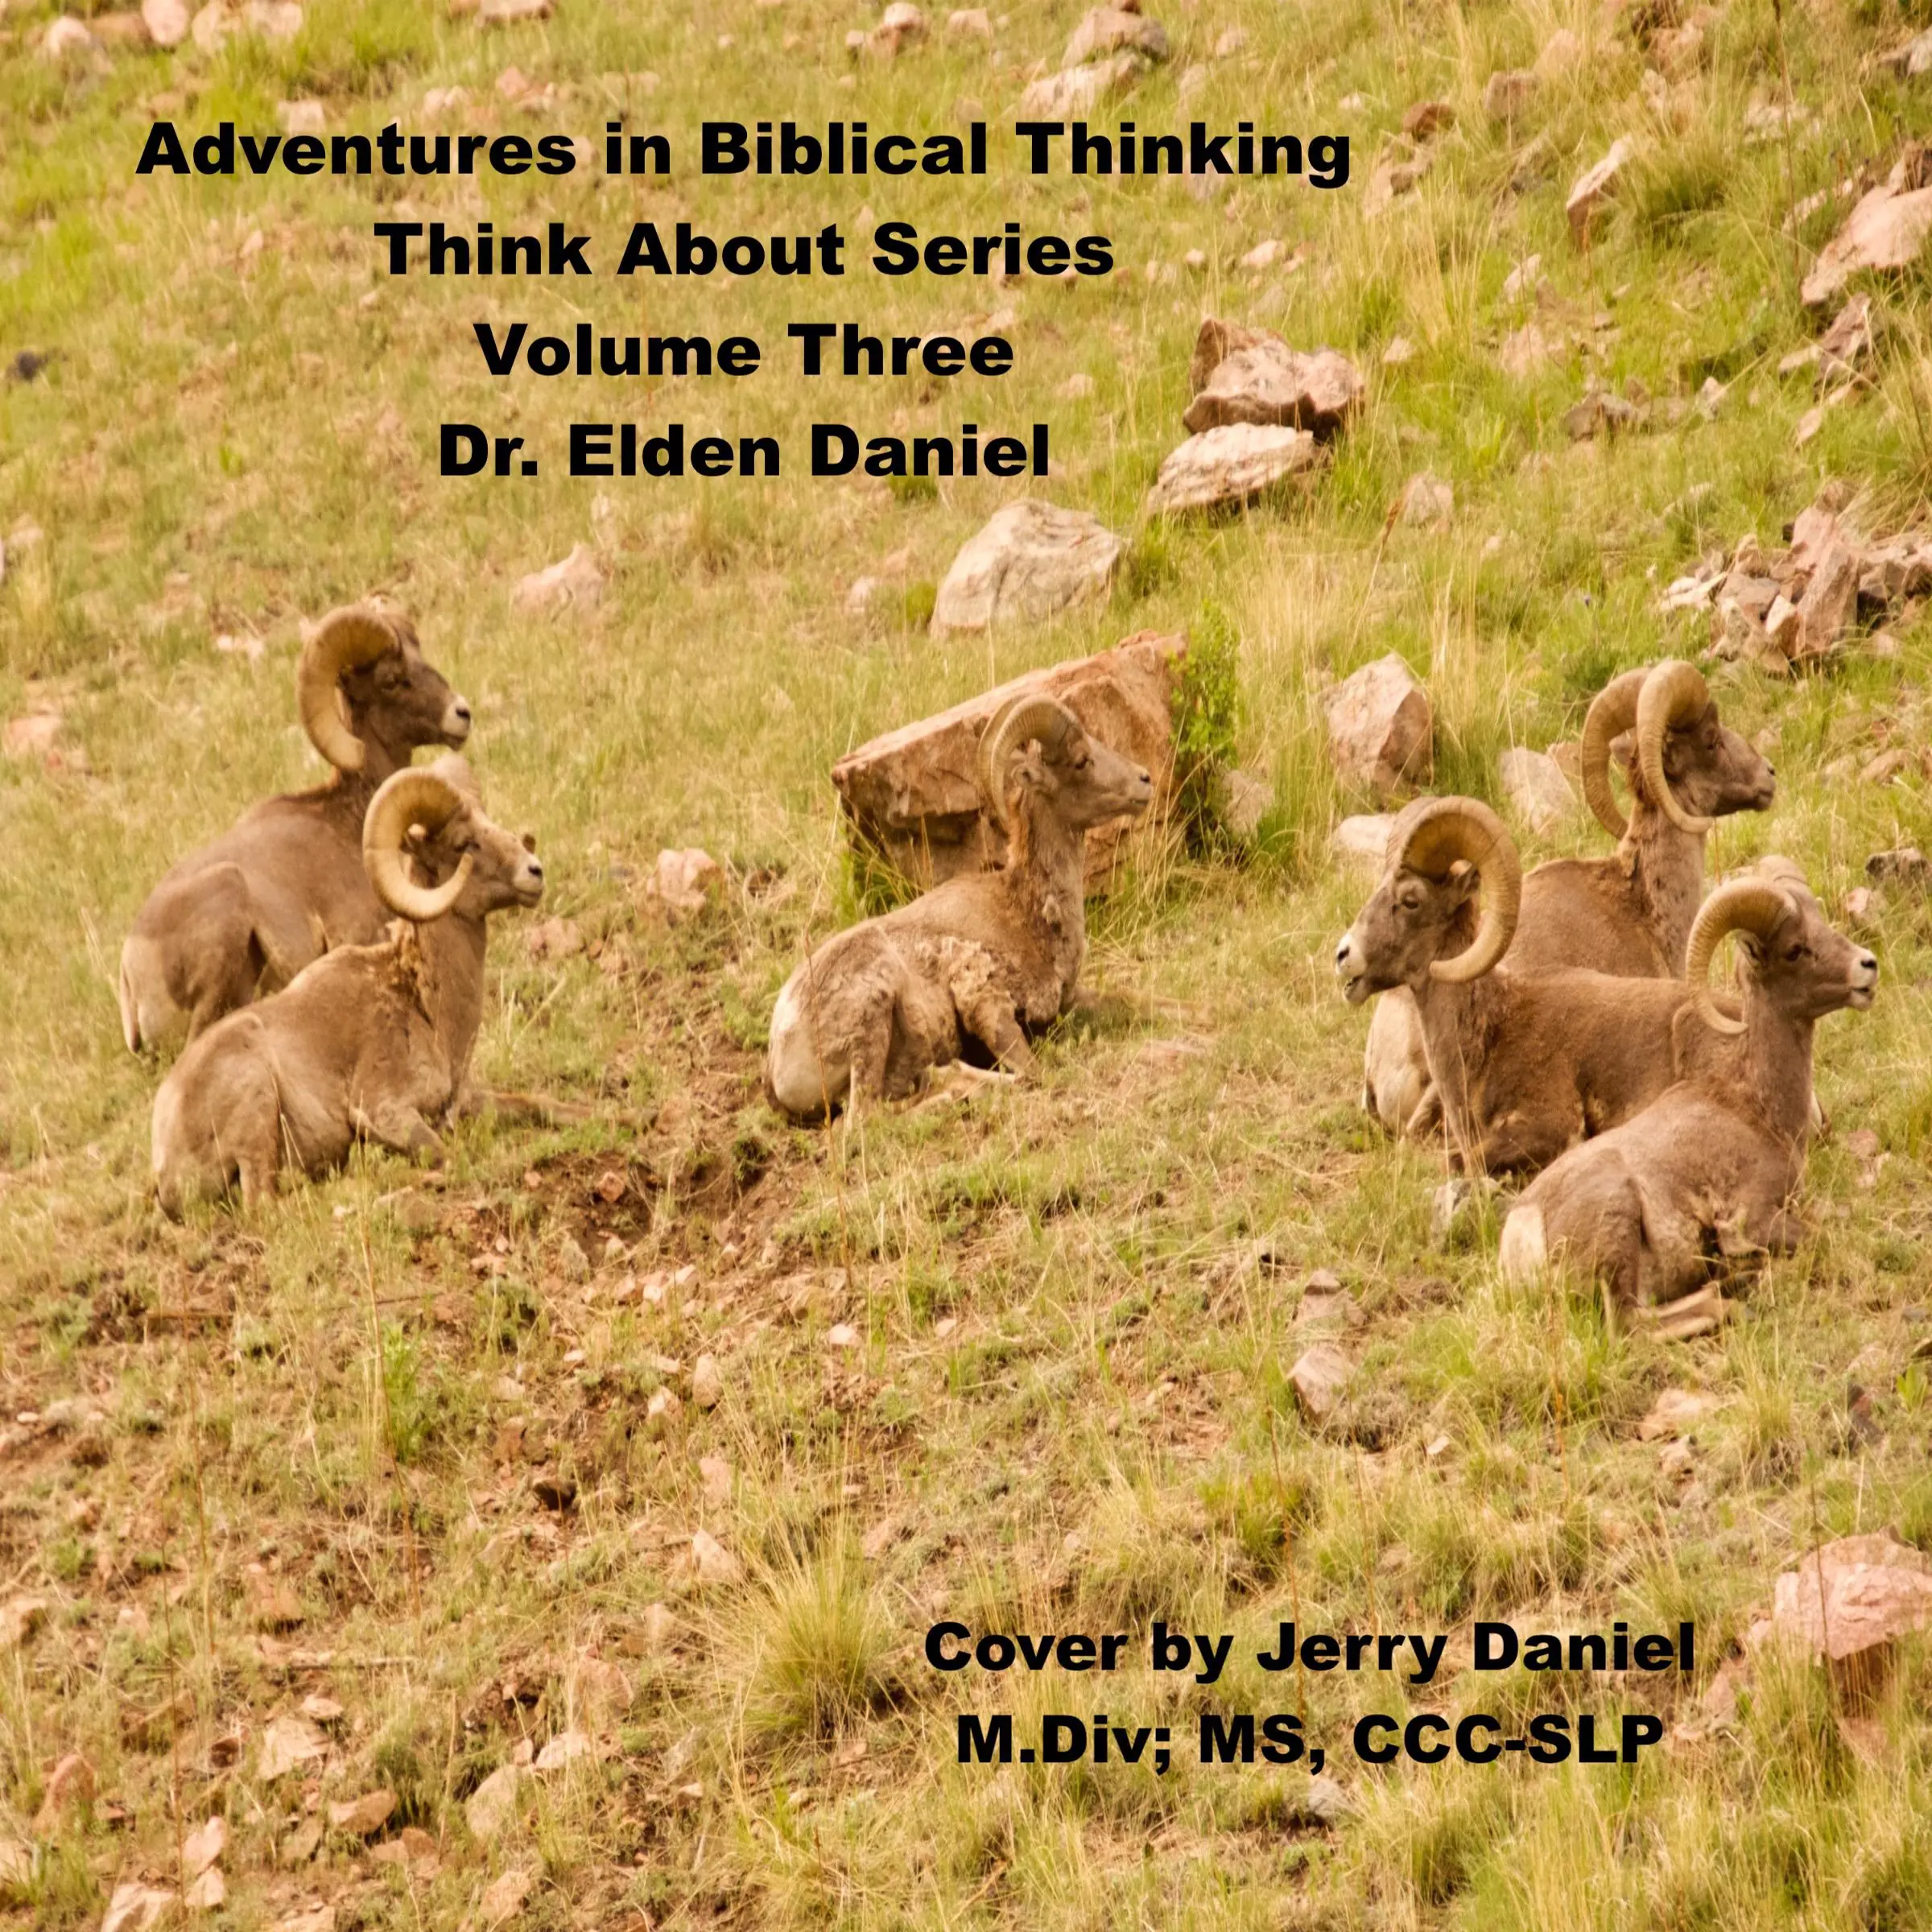 Adventures in Biblical Thinking-Think About Series-Volume 3 by Dr. Elden Daniel Audiobook